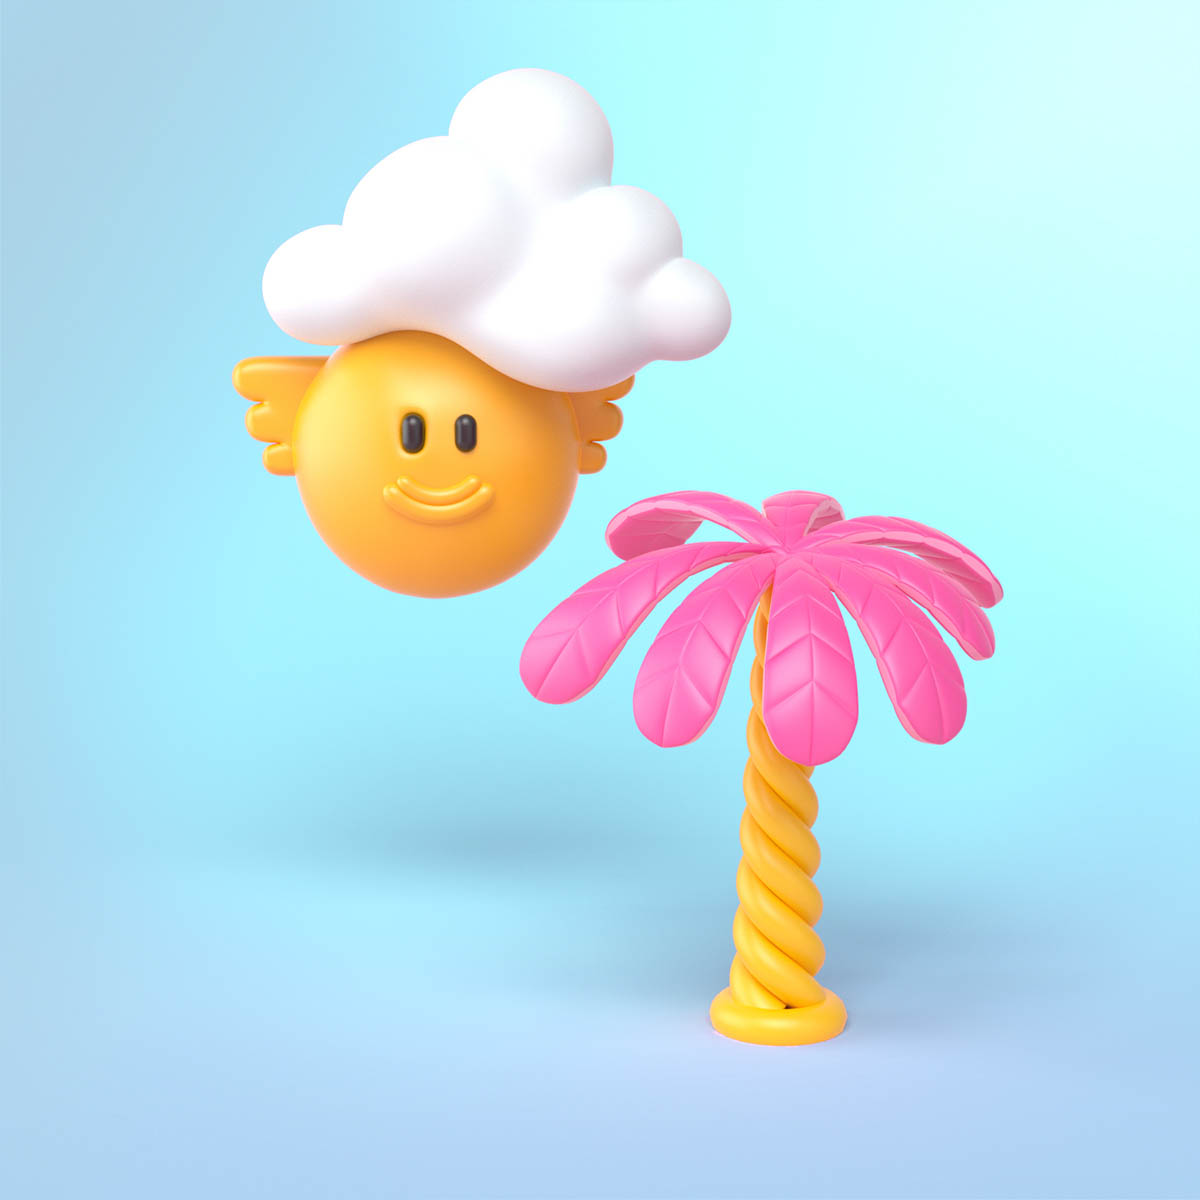 sun 3d models by nikopicto